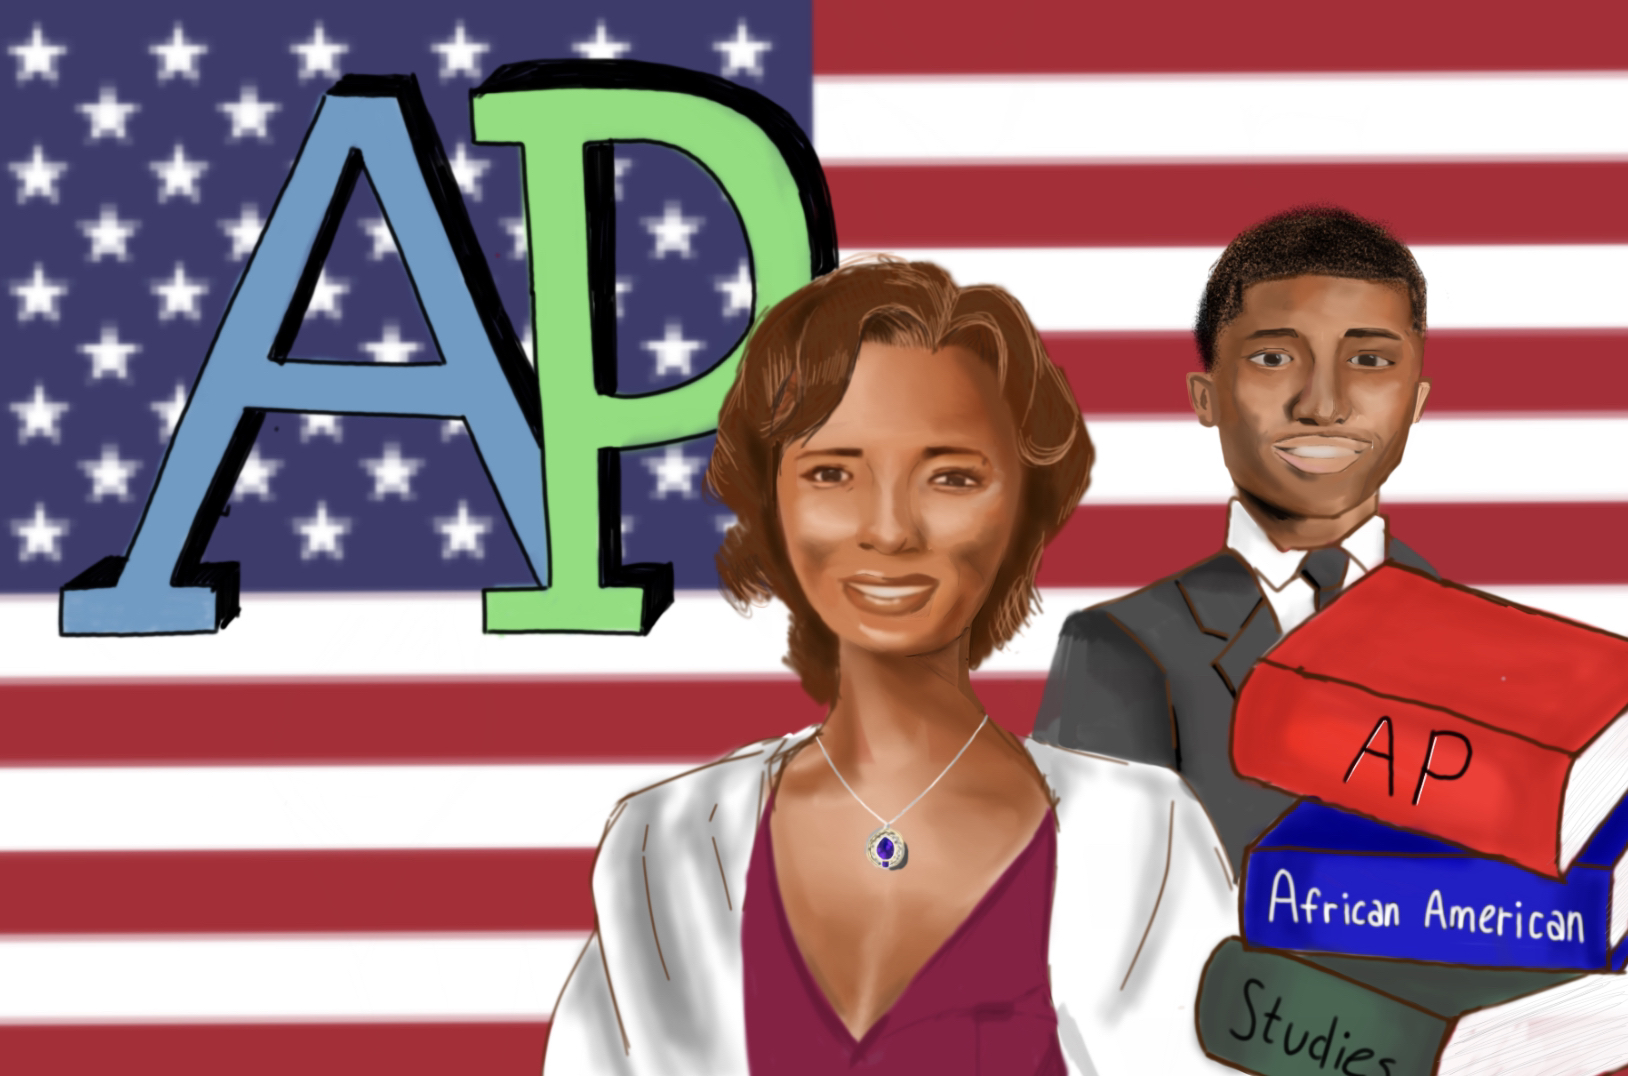 The College Board announces its new AP African American Studies Course, but amid controversy, doesnt recognize that the content should not be optional for students.